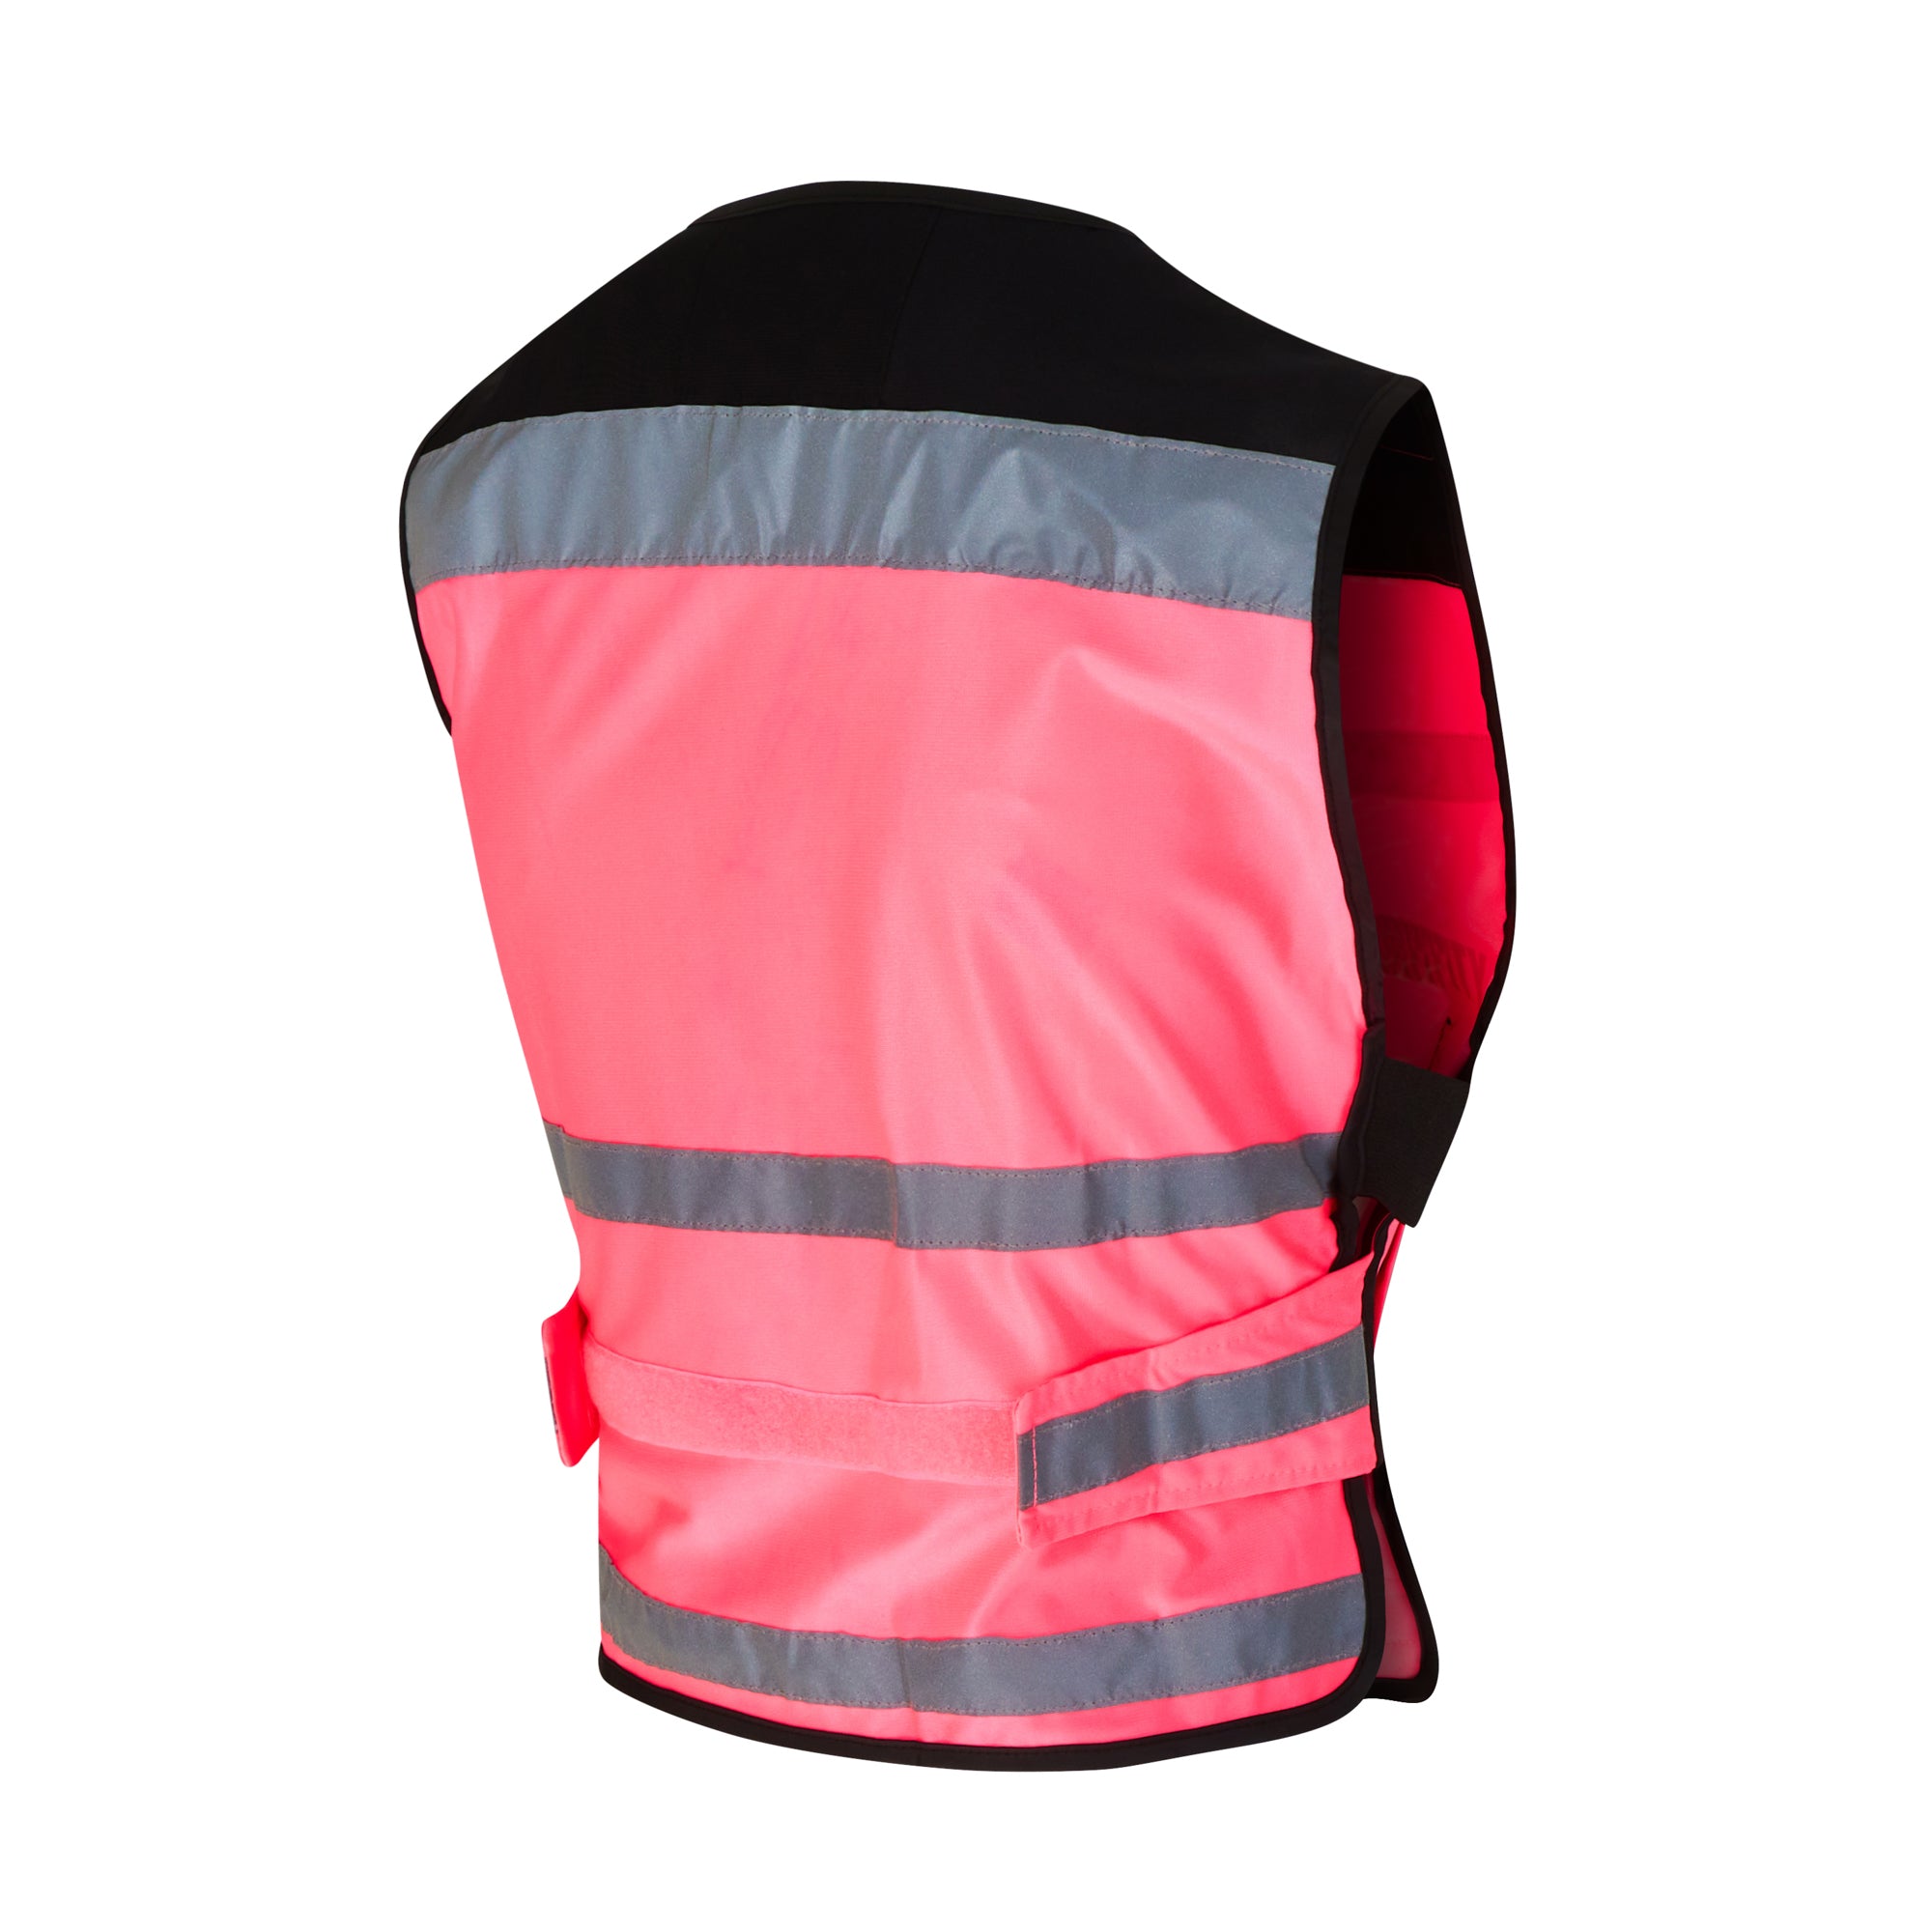 Equisafety Reflective CHILD Air Waistcoat Pink- Plain Back 